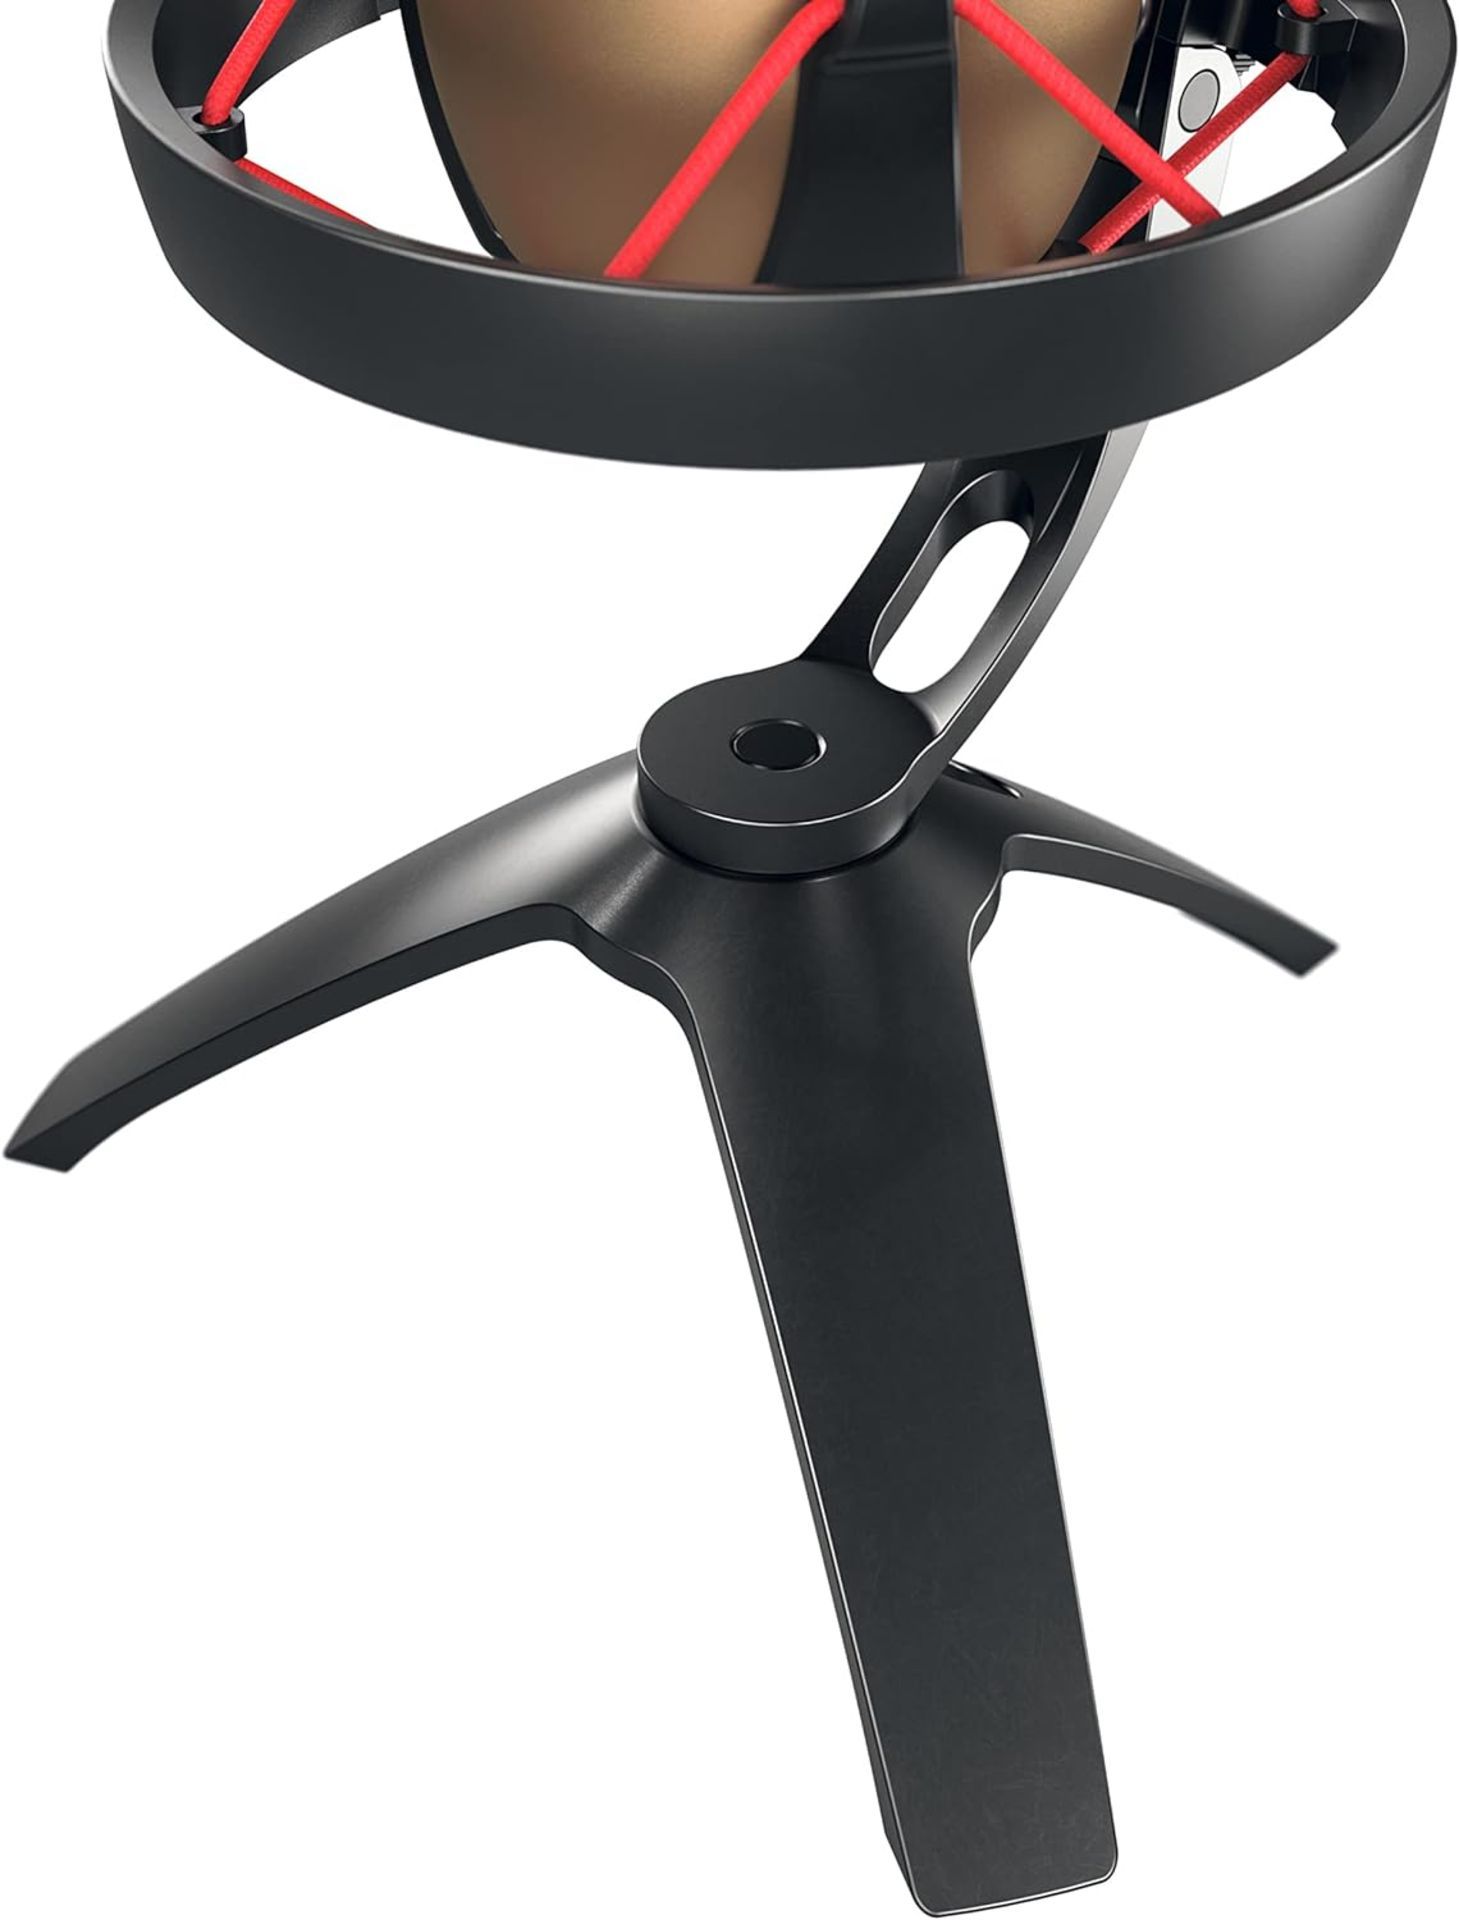 NEW & BOXED CHERRY UM 9.0 Pro RGB Black USB Desk Microphone with Shock Mount. RRP £127.99. The - Image 3 of 8